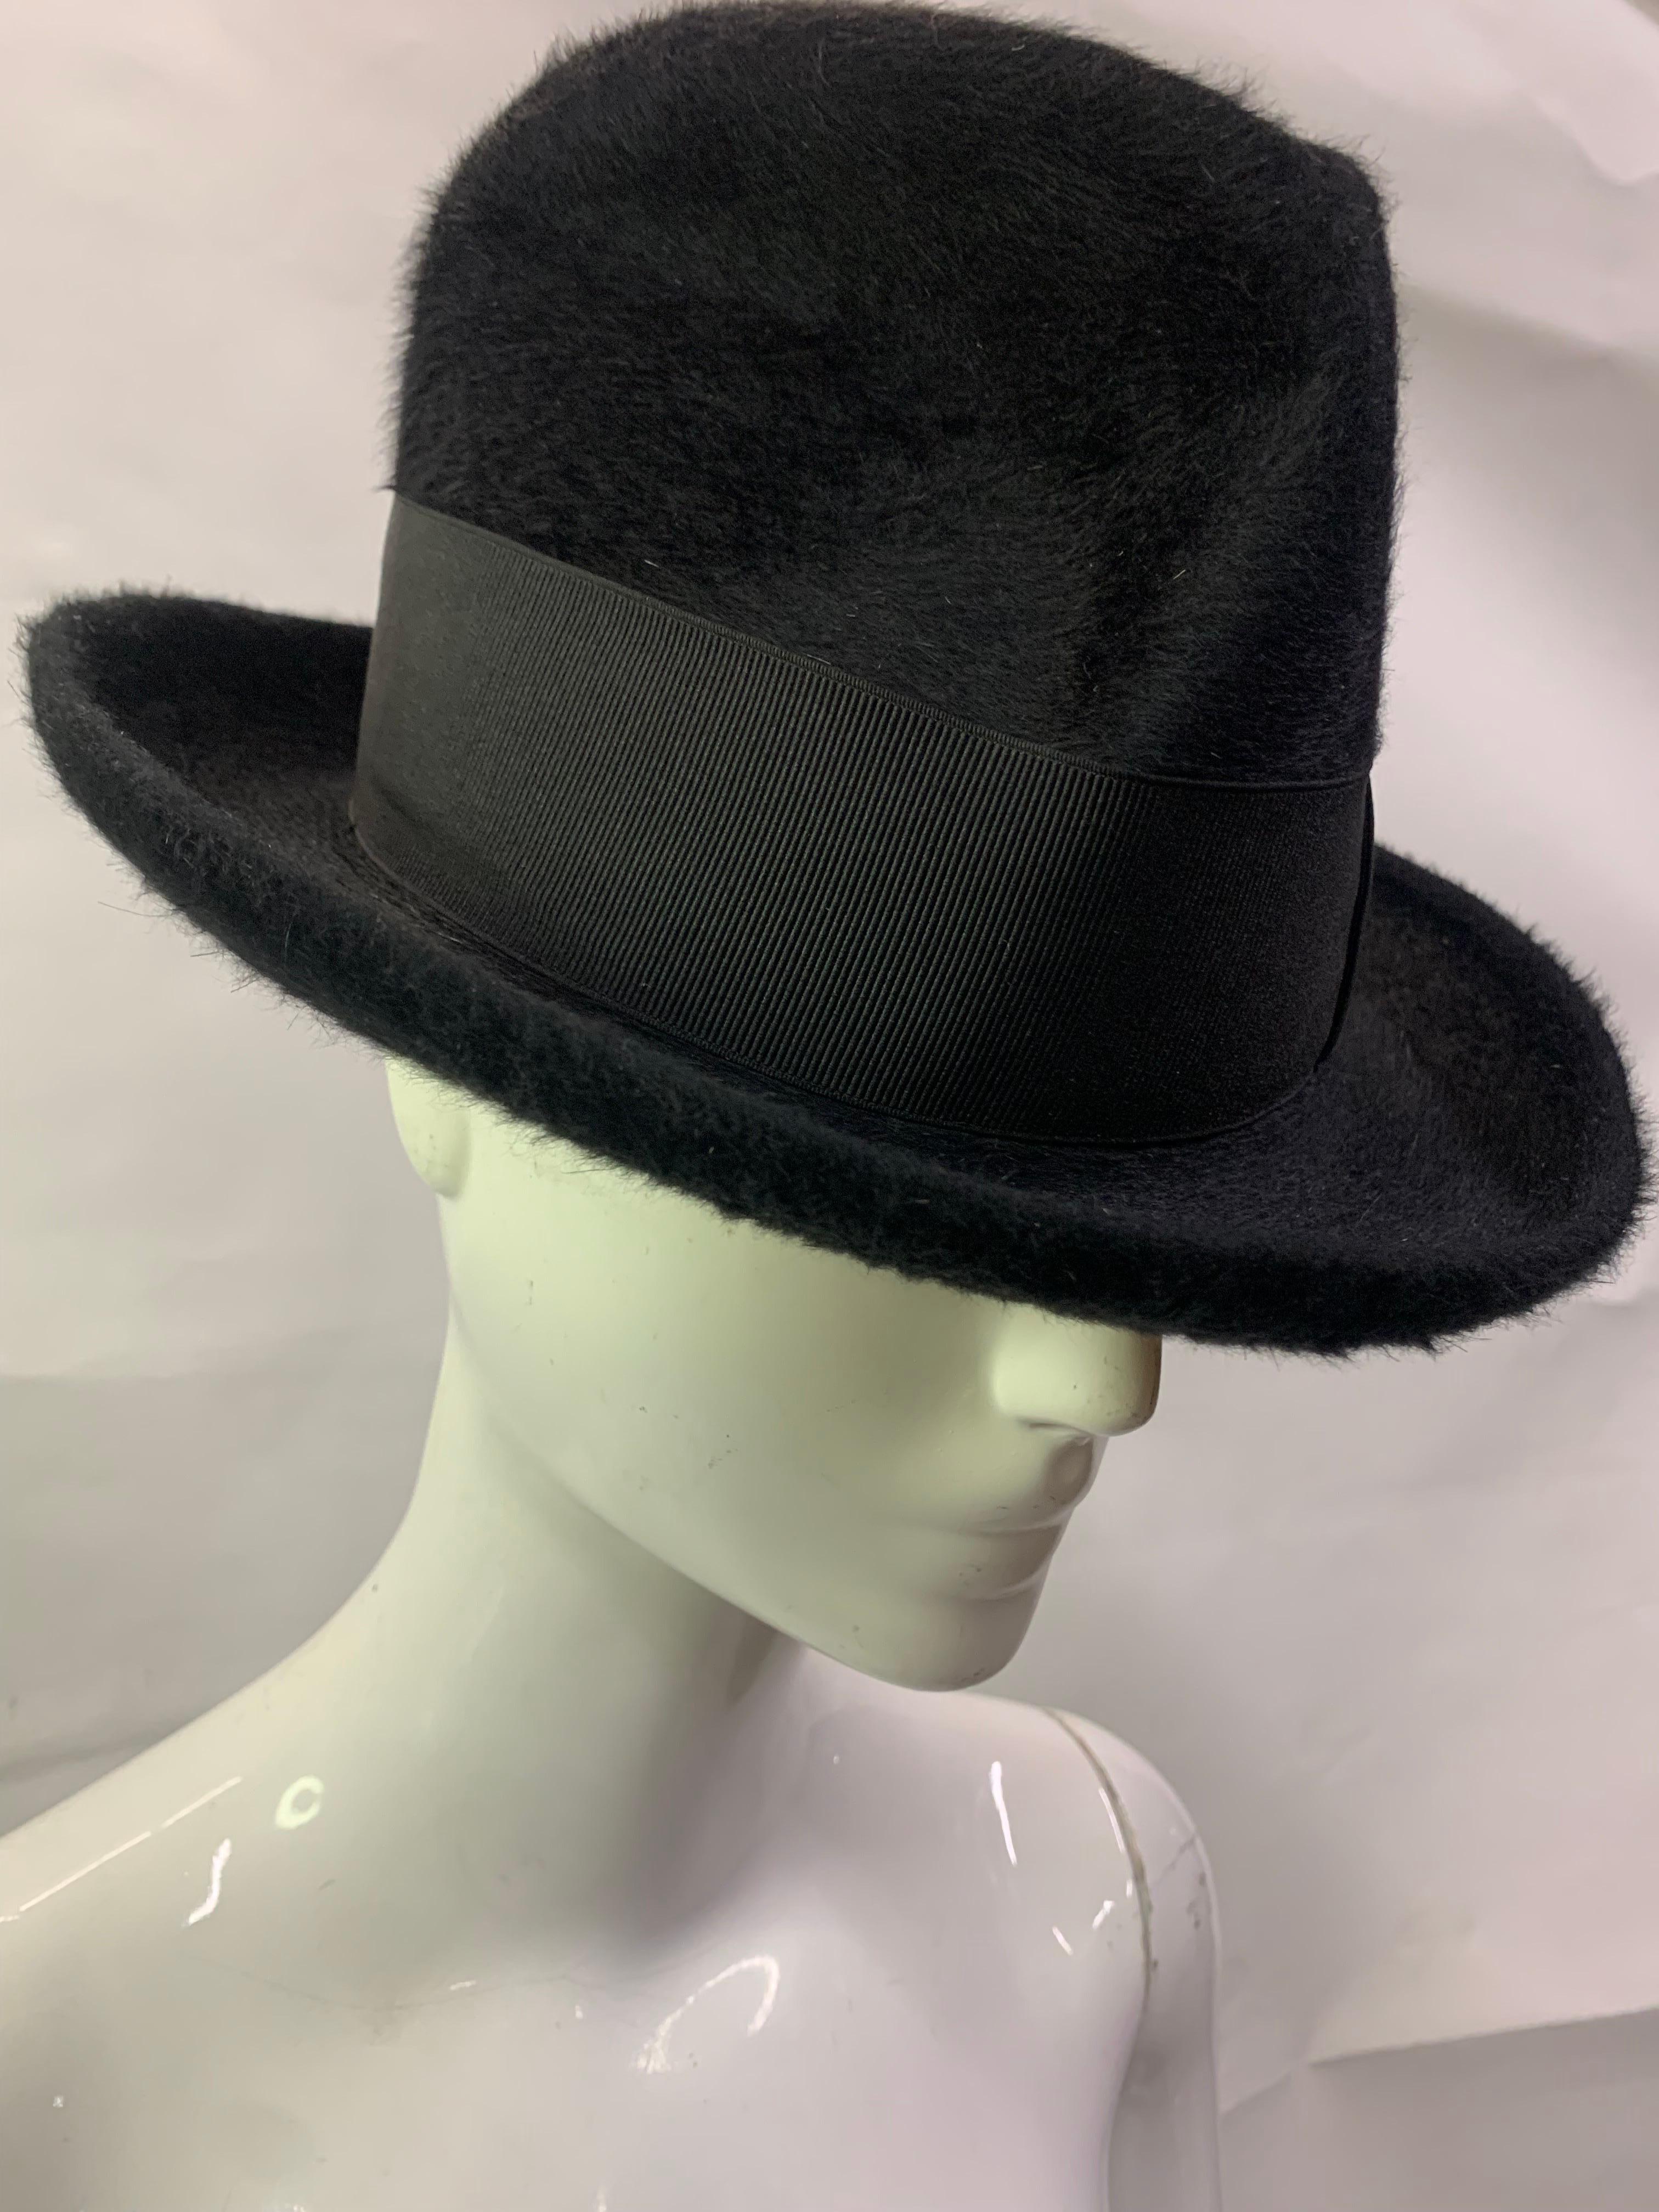 Amazing Mohair Felt Dobbs Classic Fedora in Black w Wide Grosgrain Band. A classic 1940s fedora with a modern-looking twist.  High stylish crown makes a dramatic silhouette. Satin lined and leather inner band. Size 7 3/8. 